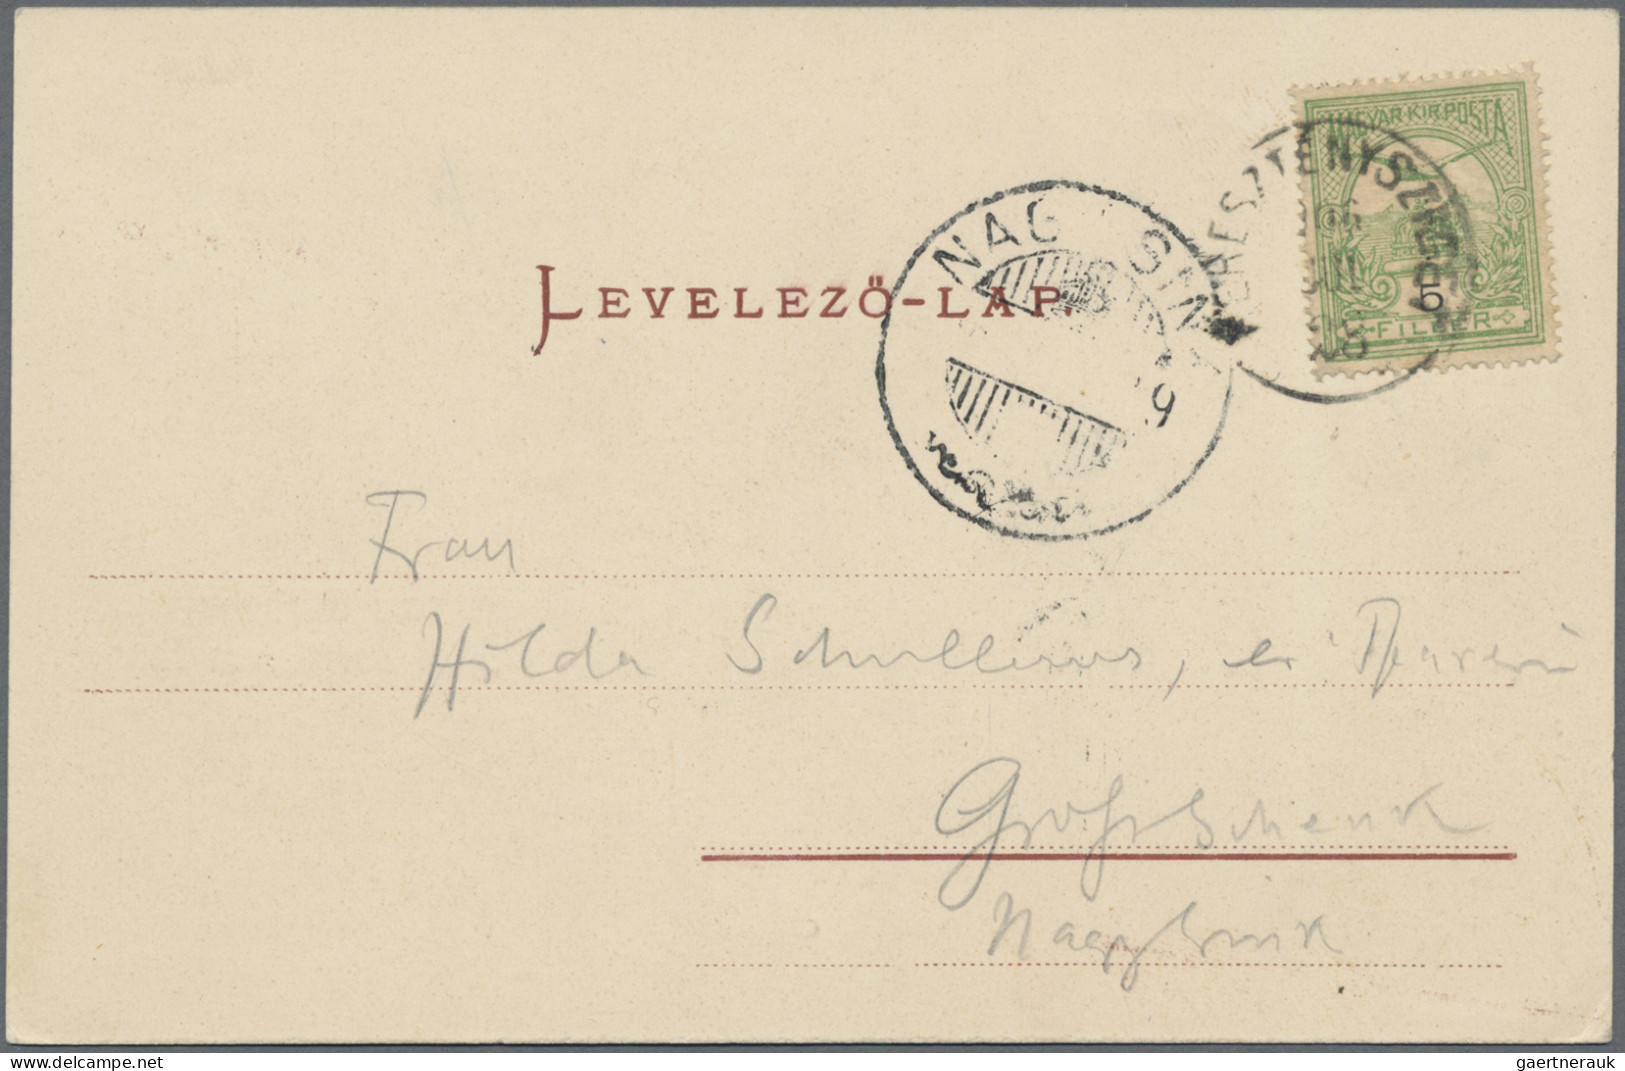 Romania - specialities: 1906/1924, Hotel Mail "Hohe Rinne" and "Bistra", group o